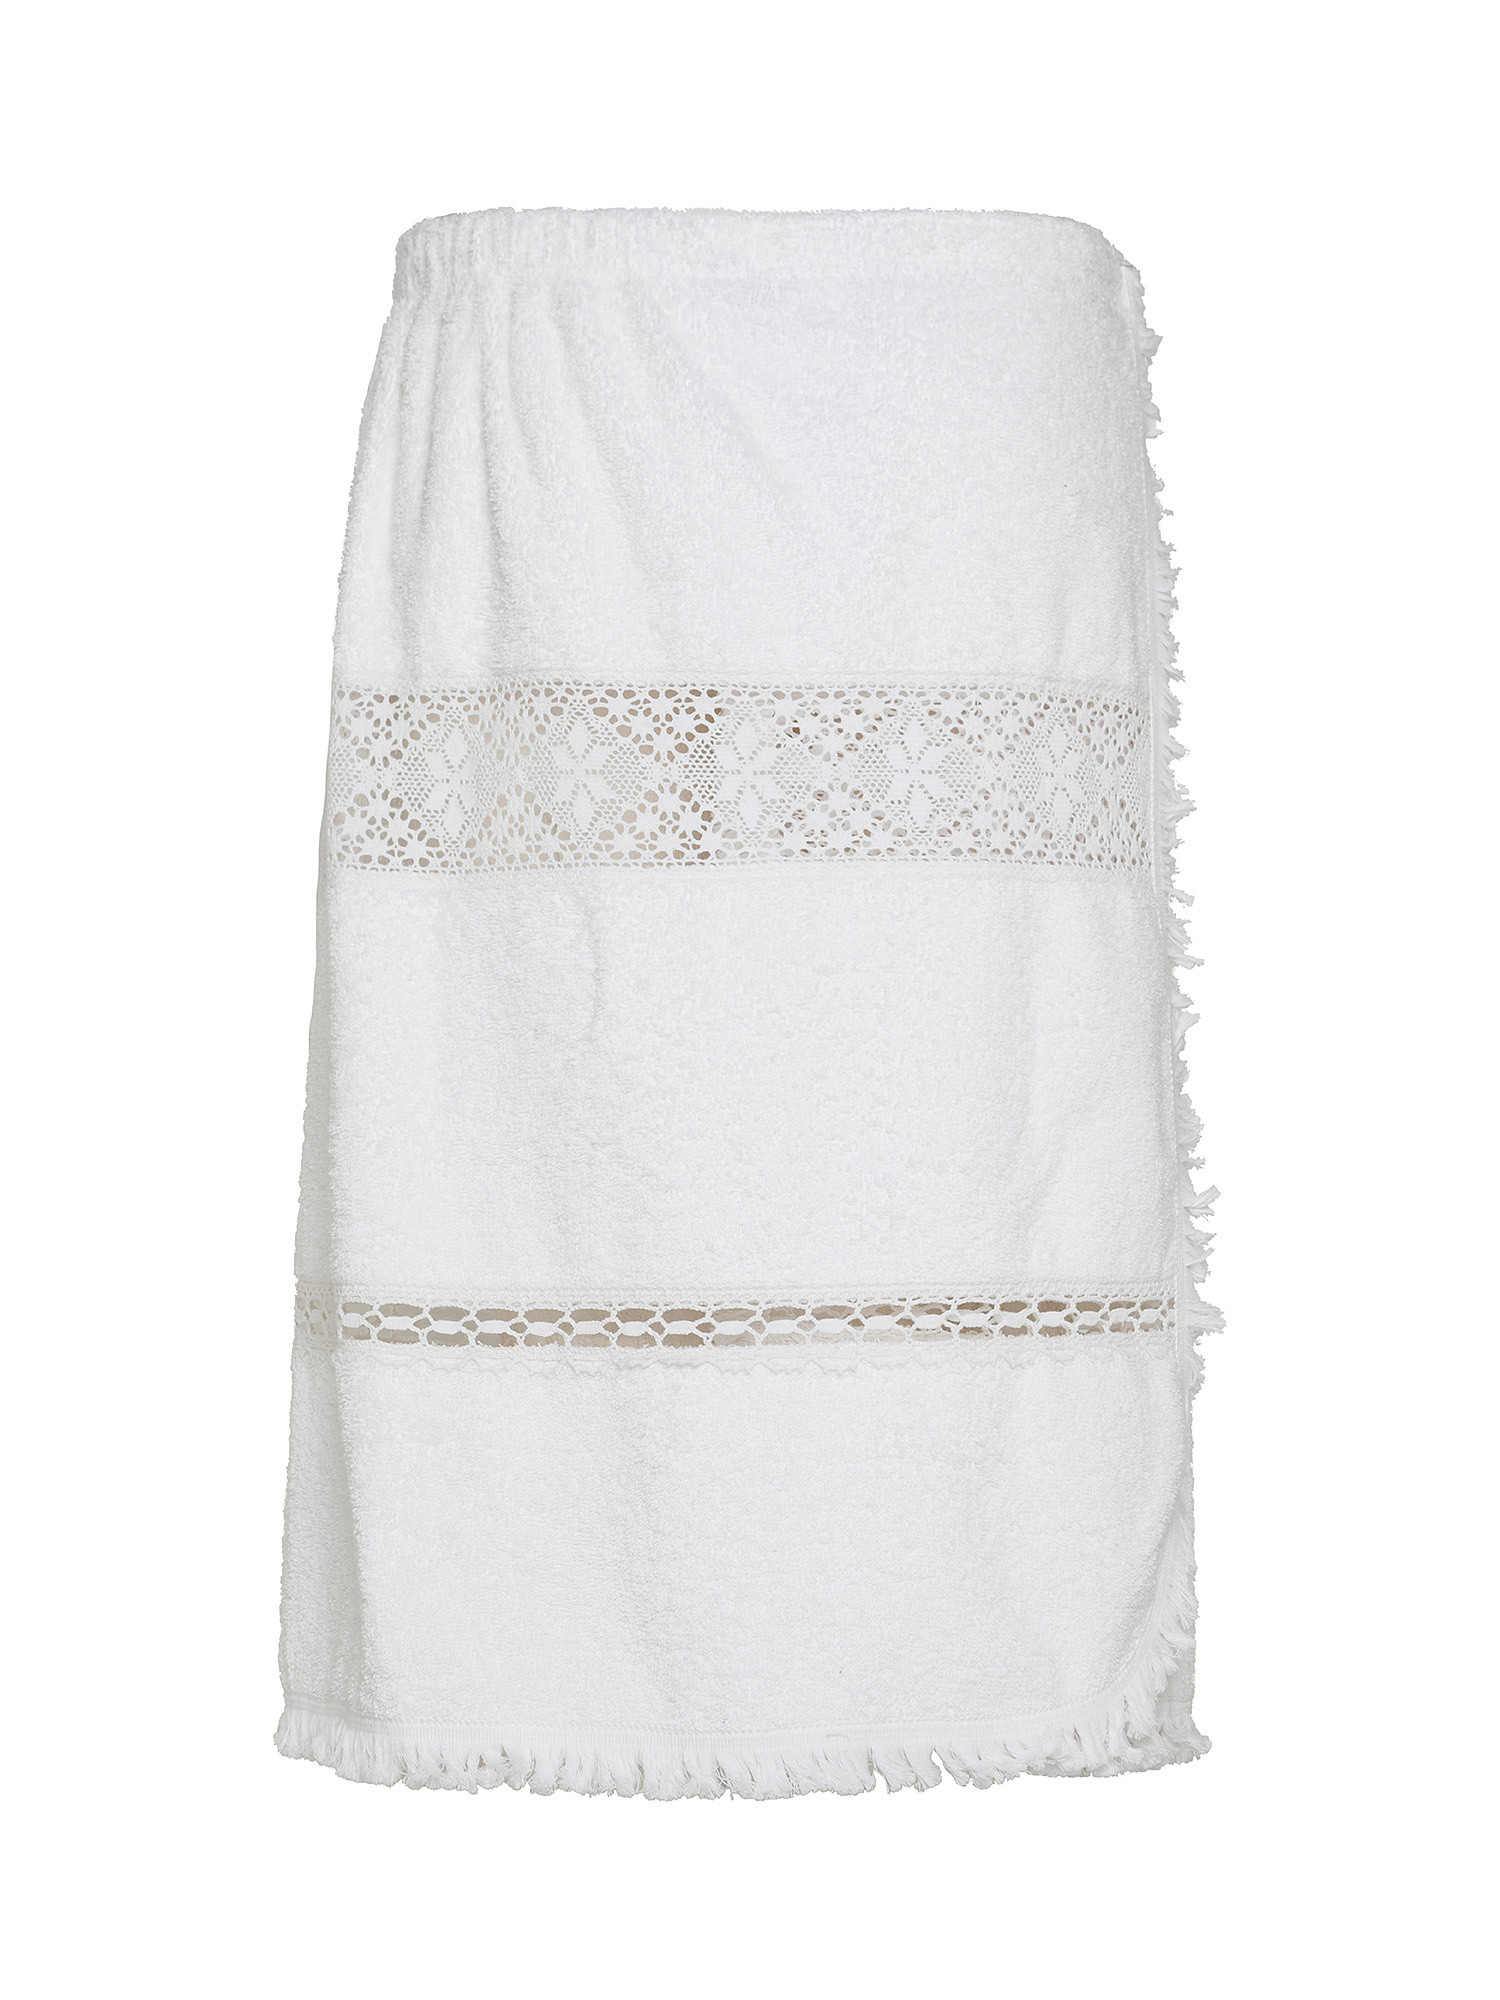 Cotton shower pareo with lace appliqués, White, large image number 1